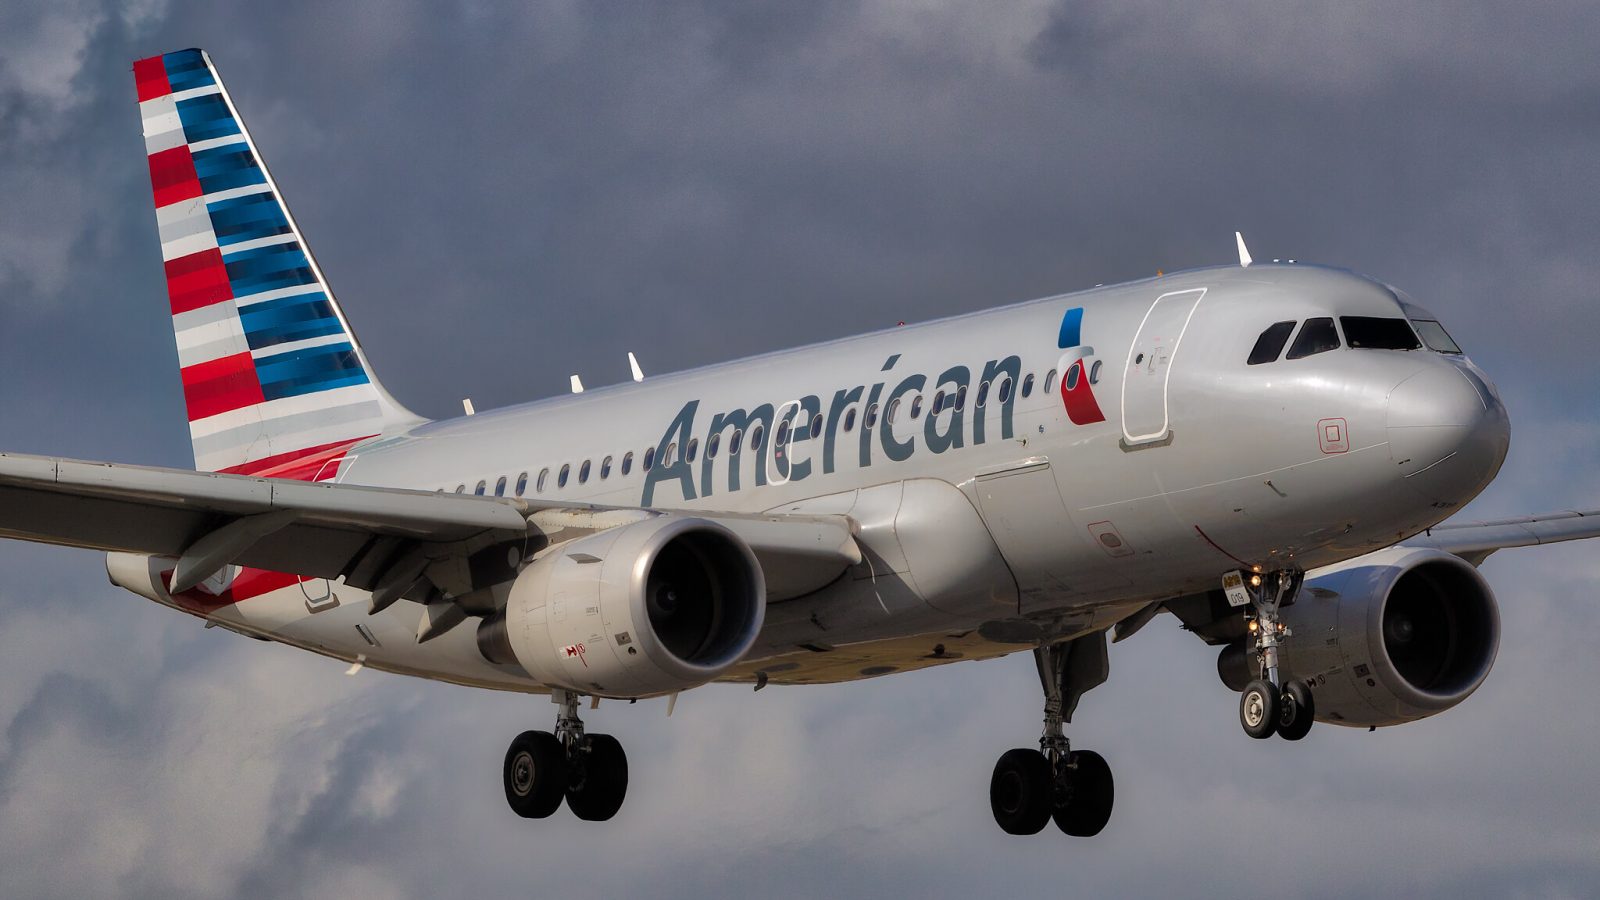 American Airlines Secures Permanent Injunction Against Mechanics Union